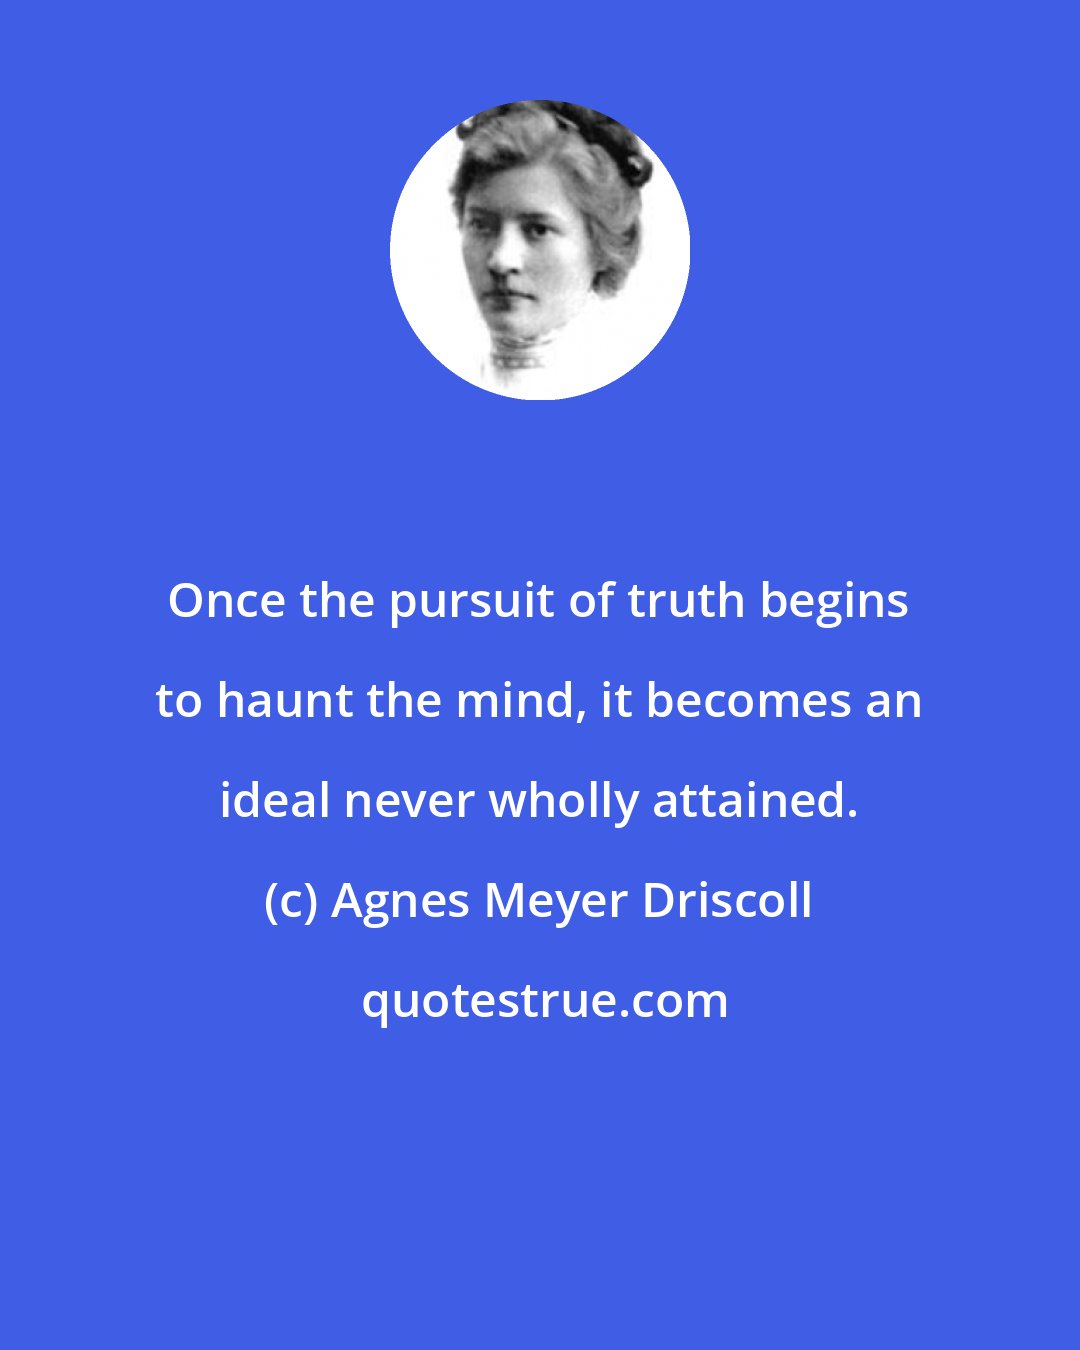 Agnes Meyer Driscoll: Once the pursuit of truth begins to haunt the mind, it becomes an ideal never wholly attained.